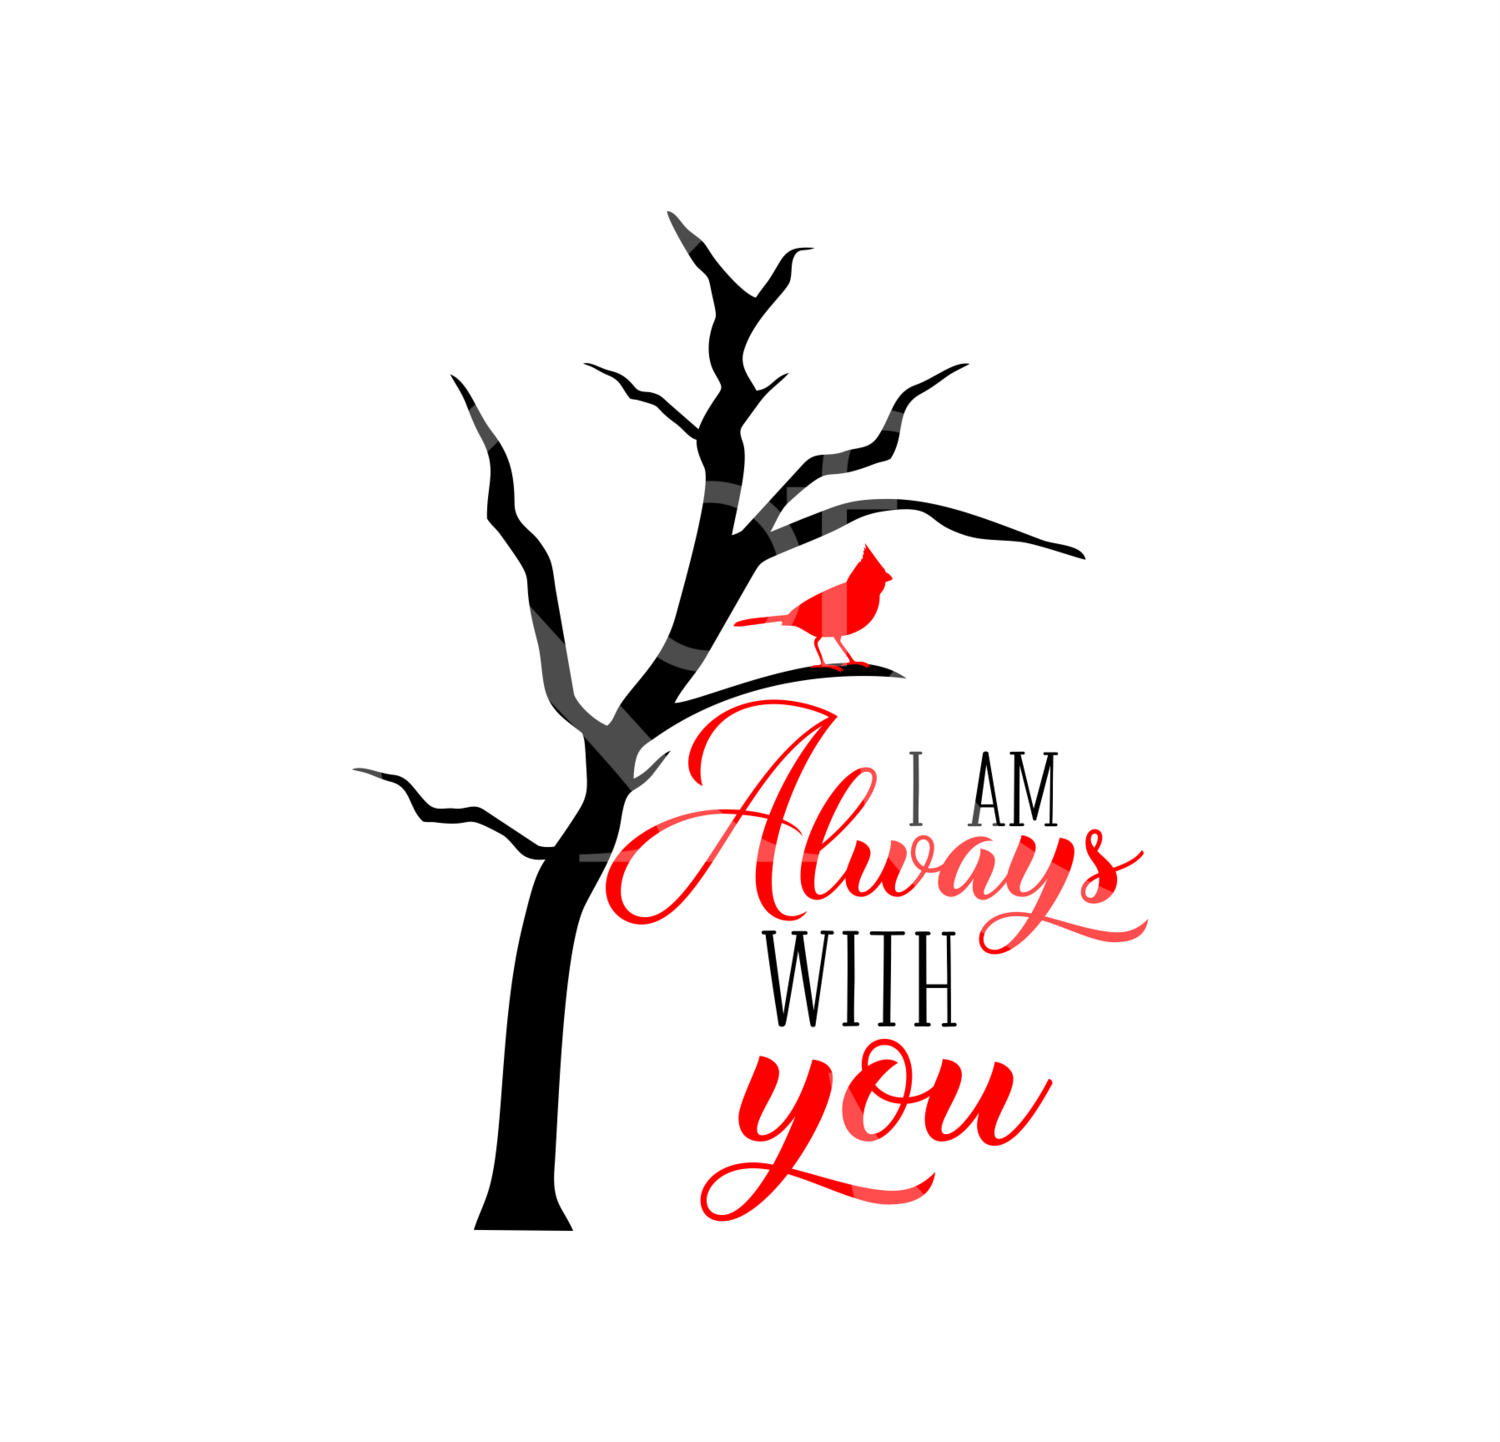 I am Always With You SVG, Religious SVG, Motivational Quotes Svg, Positive Quotes Svg, Cute Svg, Good Vibes Only Dxf, Cut File for Silhouette, SVG for Cricut